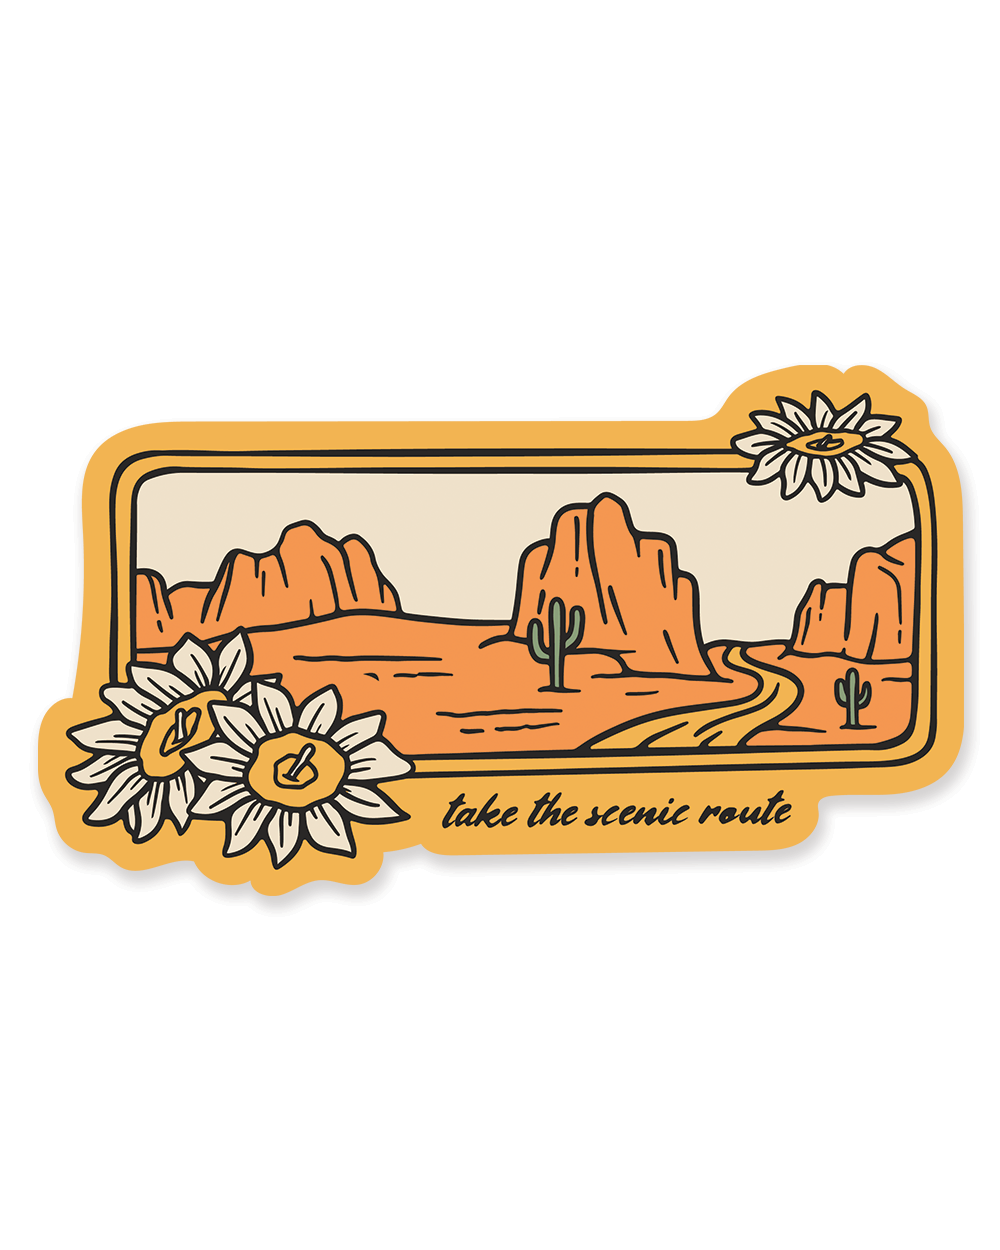 Take the scenic route desert sticker by Keep Nature Wild